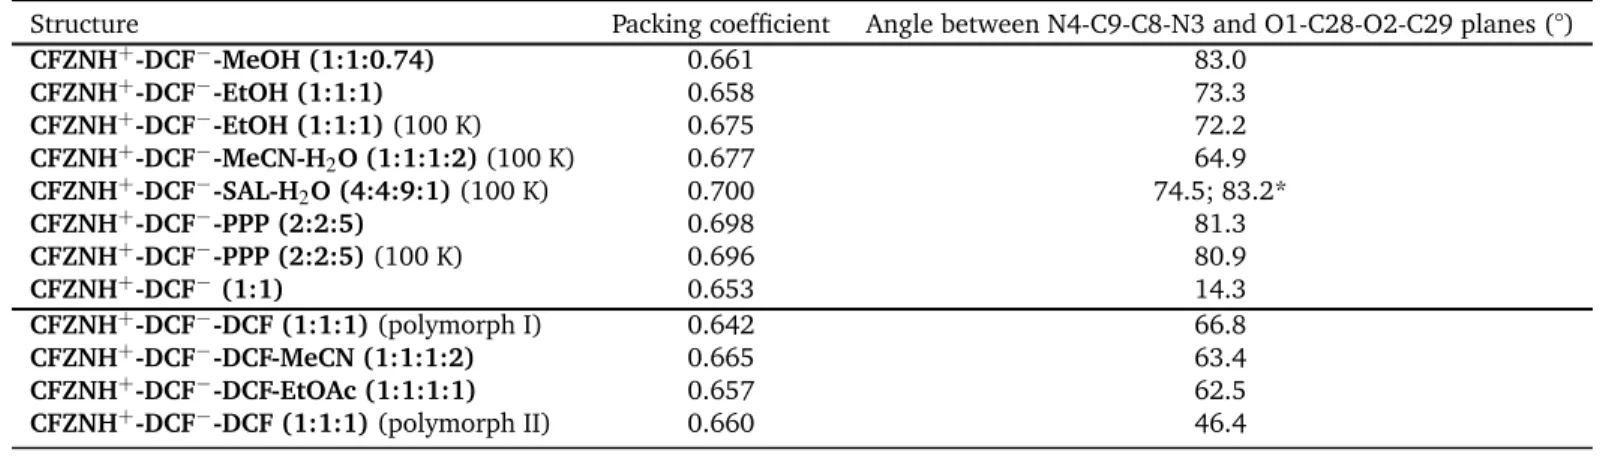 Table 3 Packing coefficient of the determined structures (at 295 K unless stated otherwise in the table) and angles between planes passing through N4- N4-C9-C8-N3 atoms of clofaziminium cations and O1-C28-O2-C29 atoms of diclofenac anions.*Angle between pl